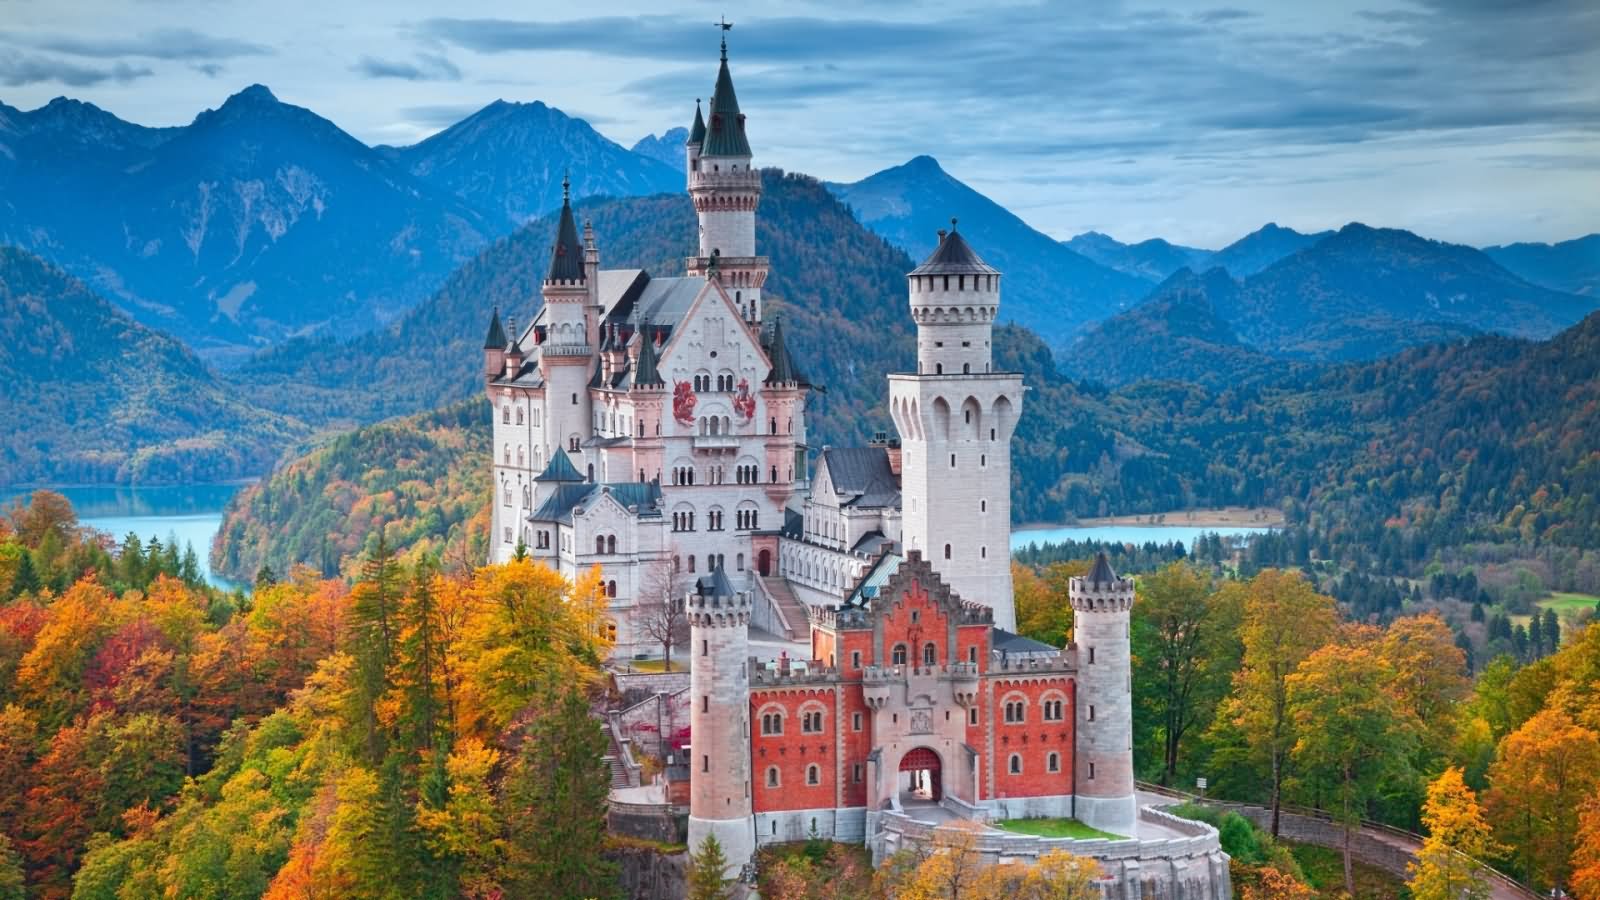 Adorable View Image of The Neuschwanstein Castle